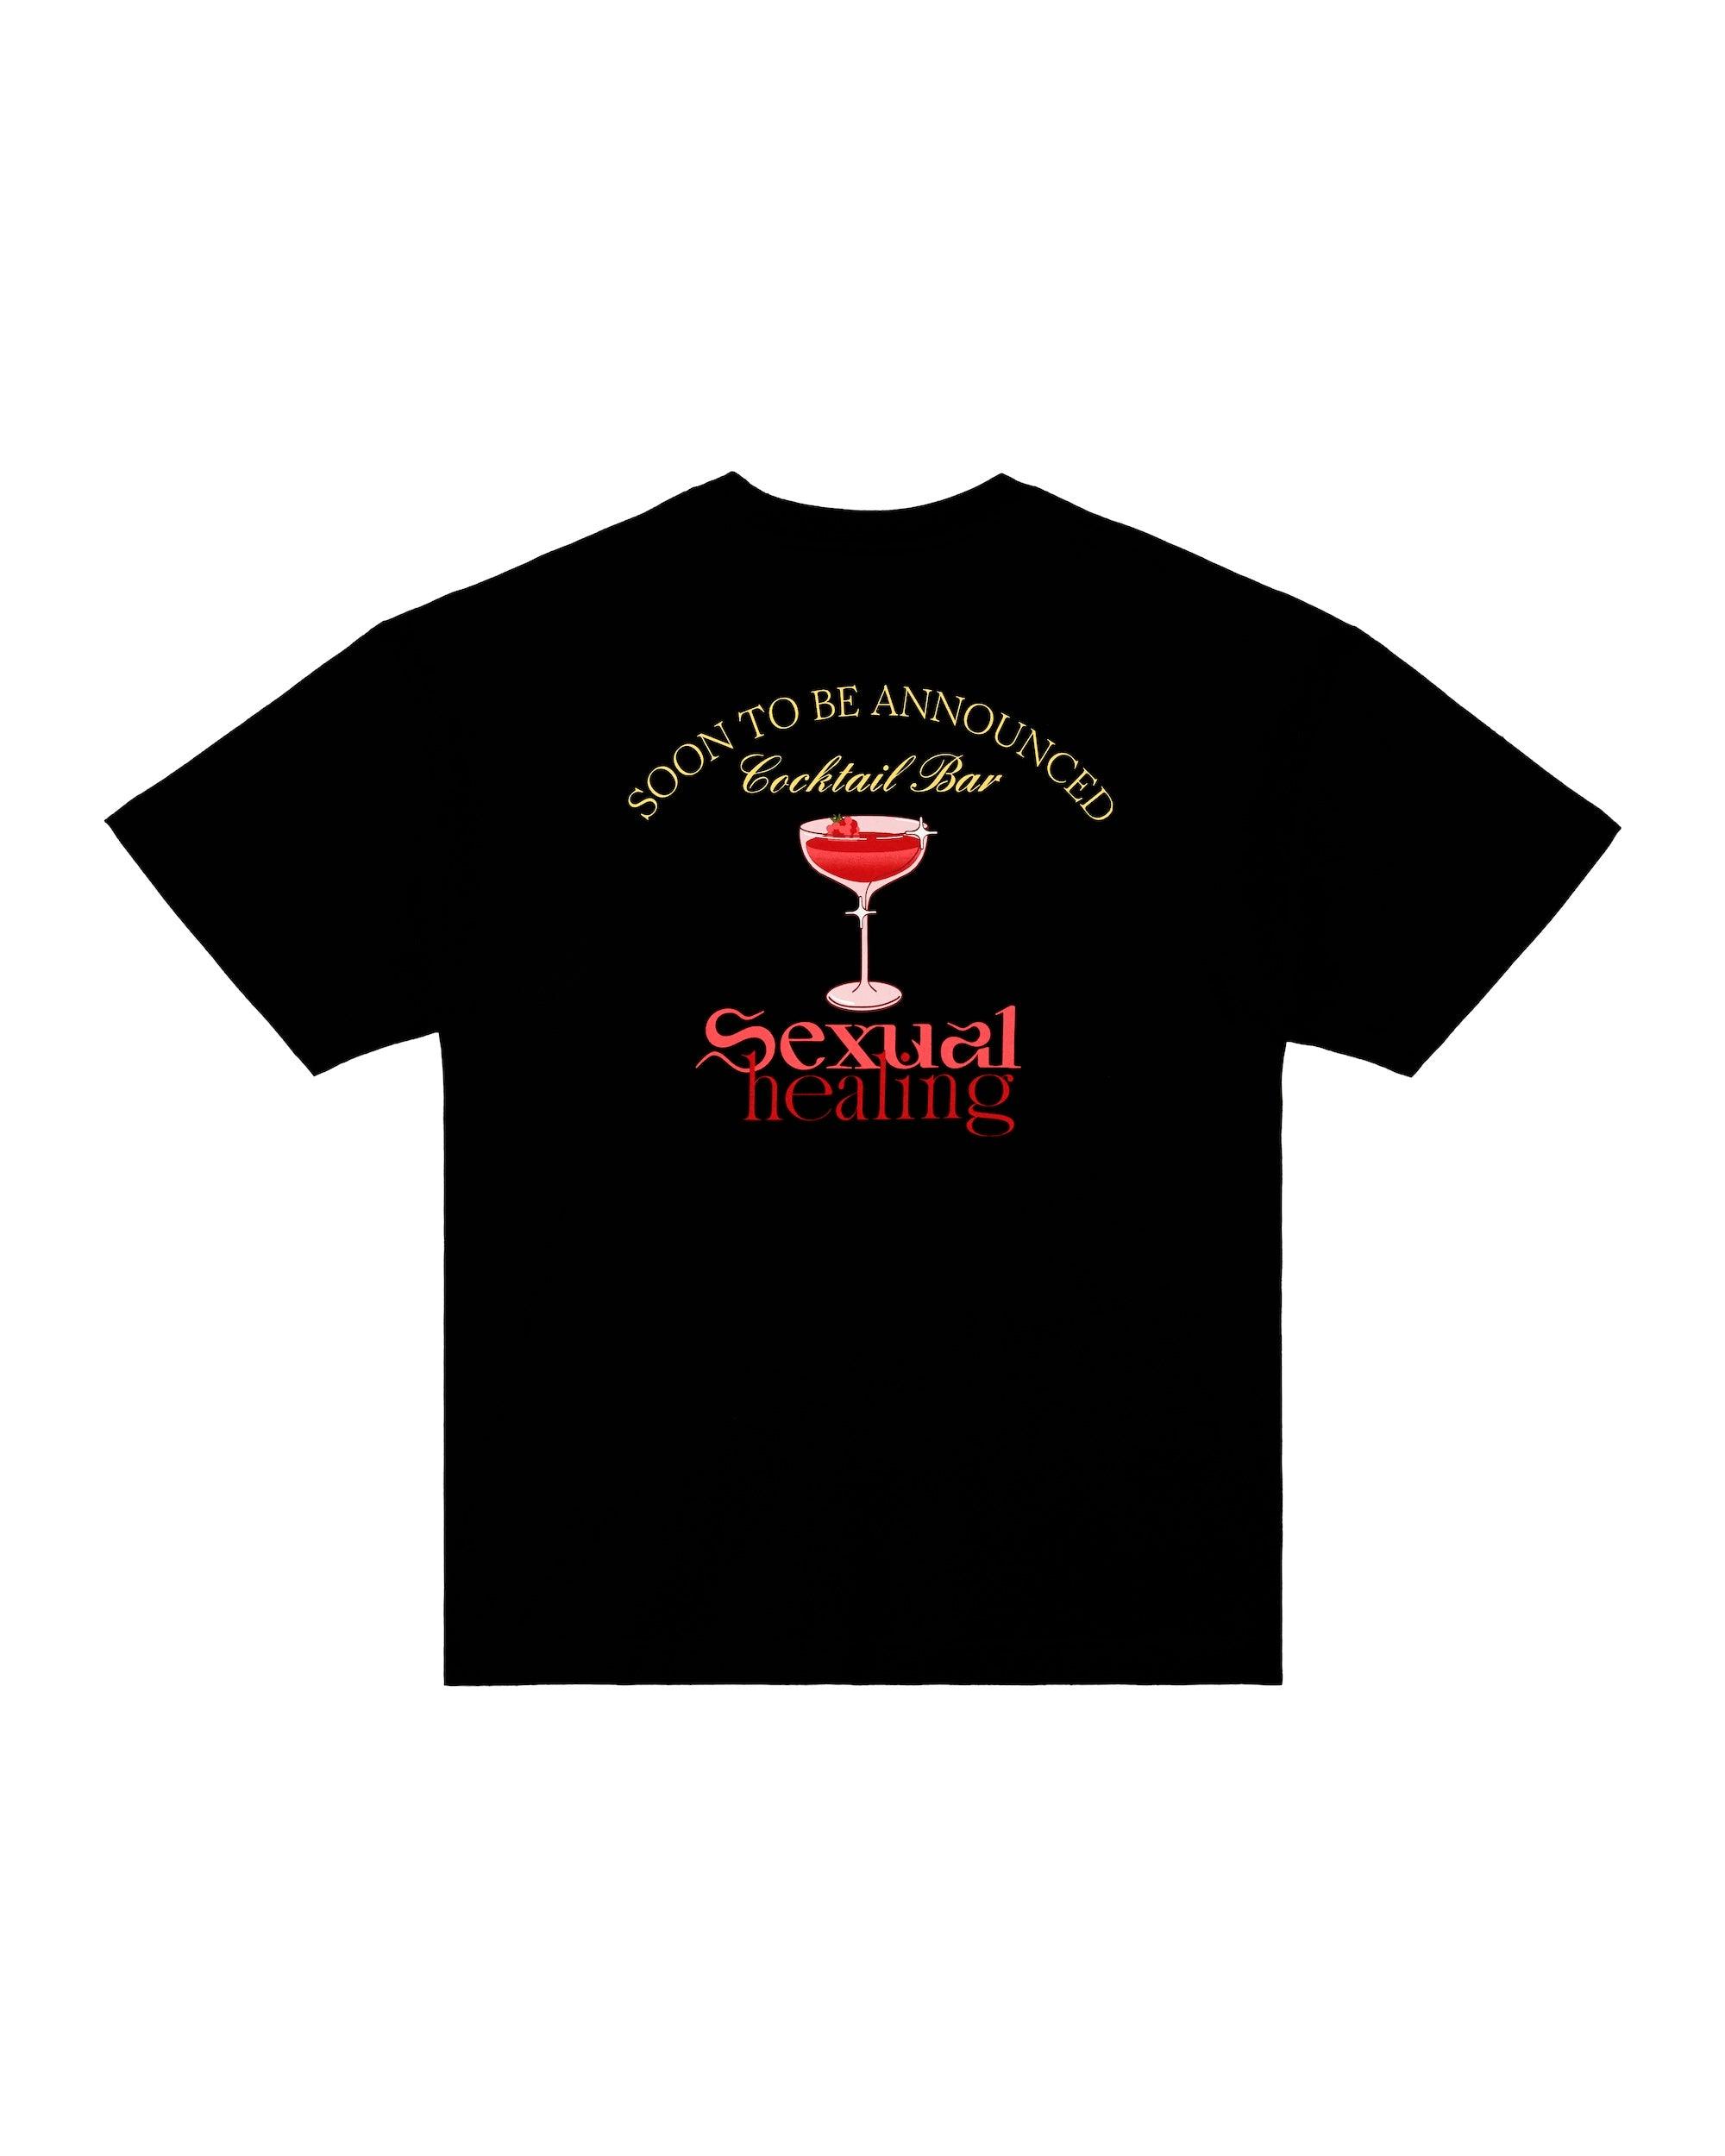 Sexual Healing T-Shirt - SOON TO BE ANNOUNCED